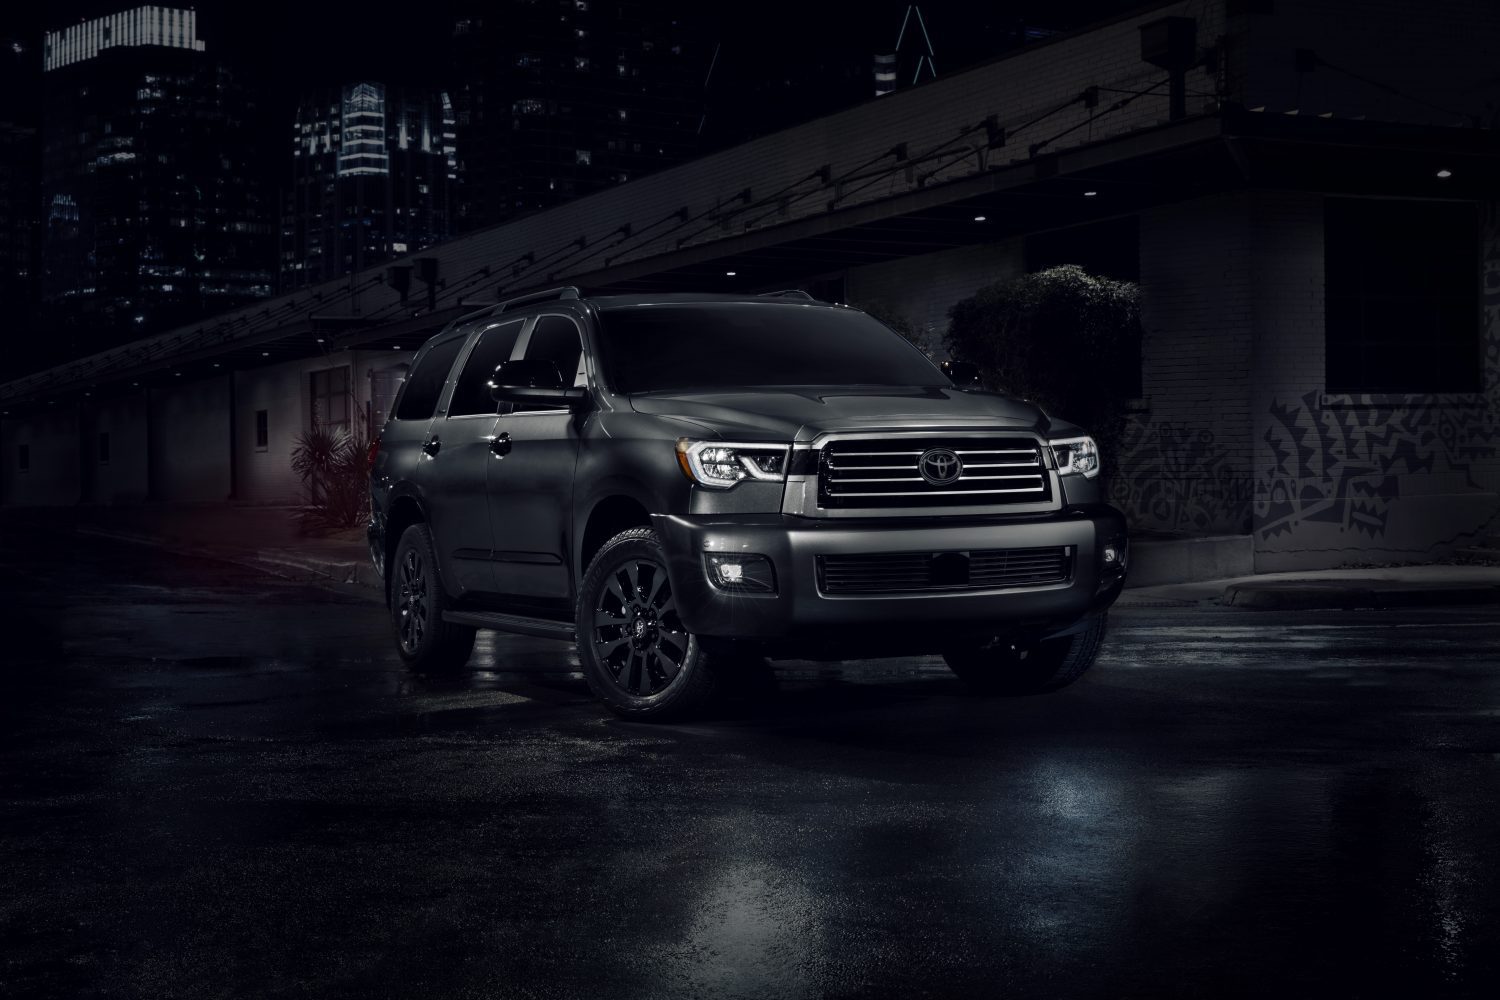 A 2022 Toyota Sequoia in dark grey parked outside in a dark outdoor area.